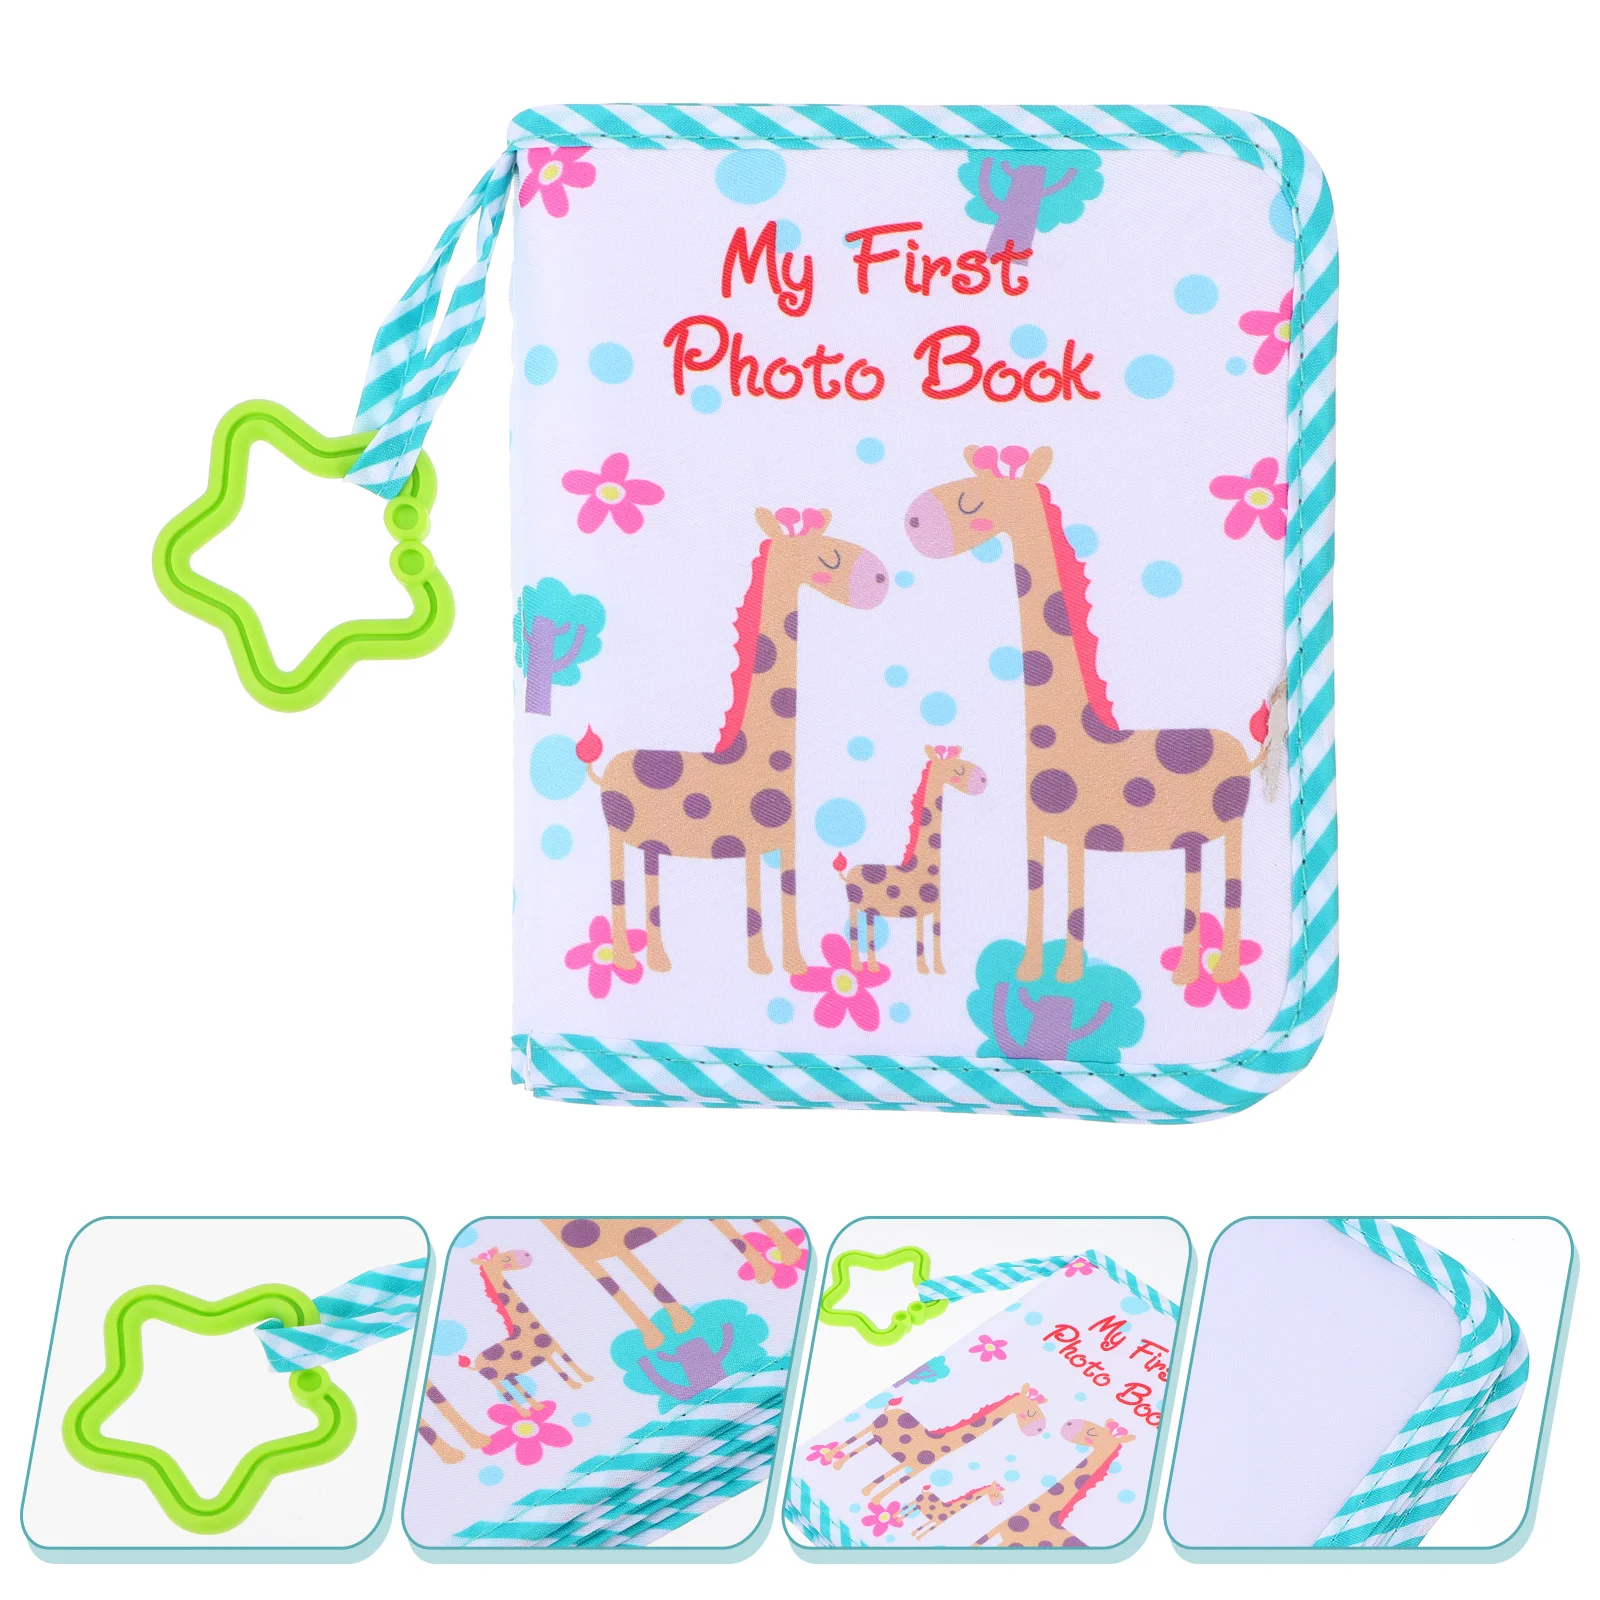 

Album Baby Photo Book First Books Memory Yearfamily My Picture Albums Cloth Fabric Diy Growth Babys Babies Guest Shower Infant